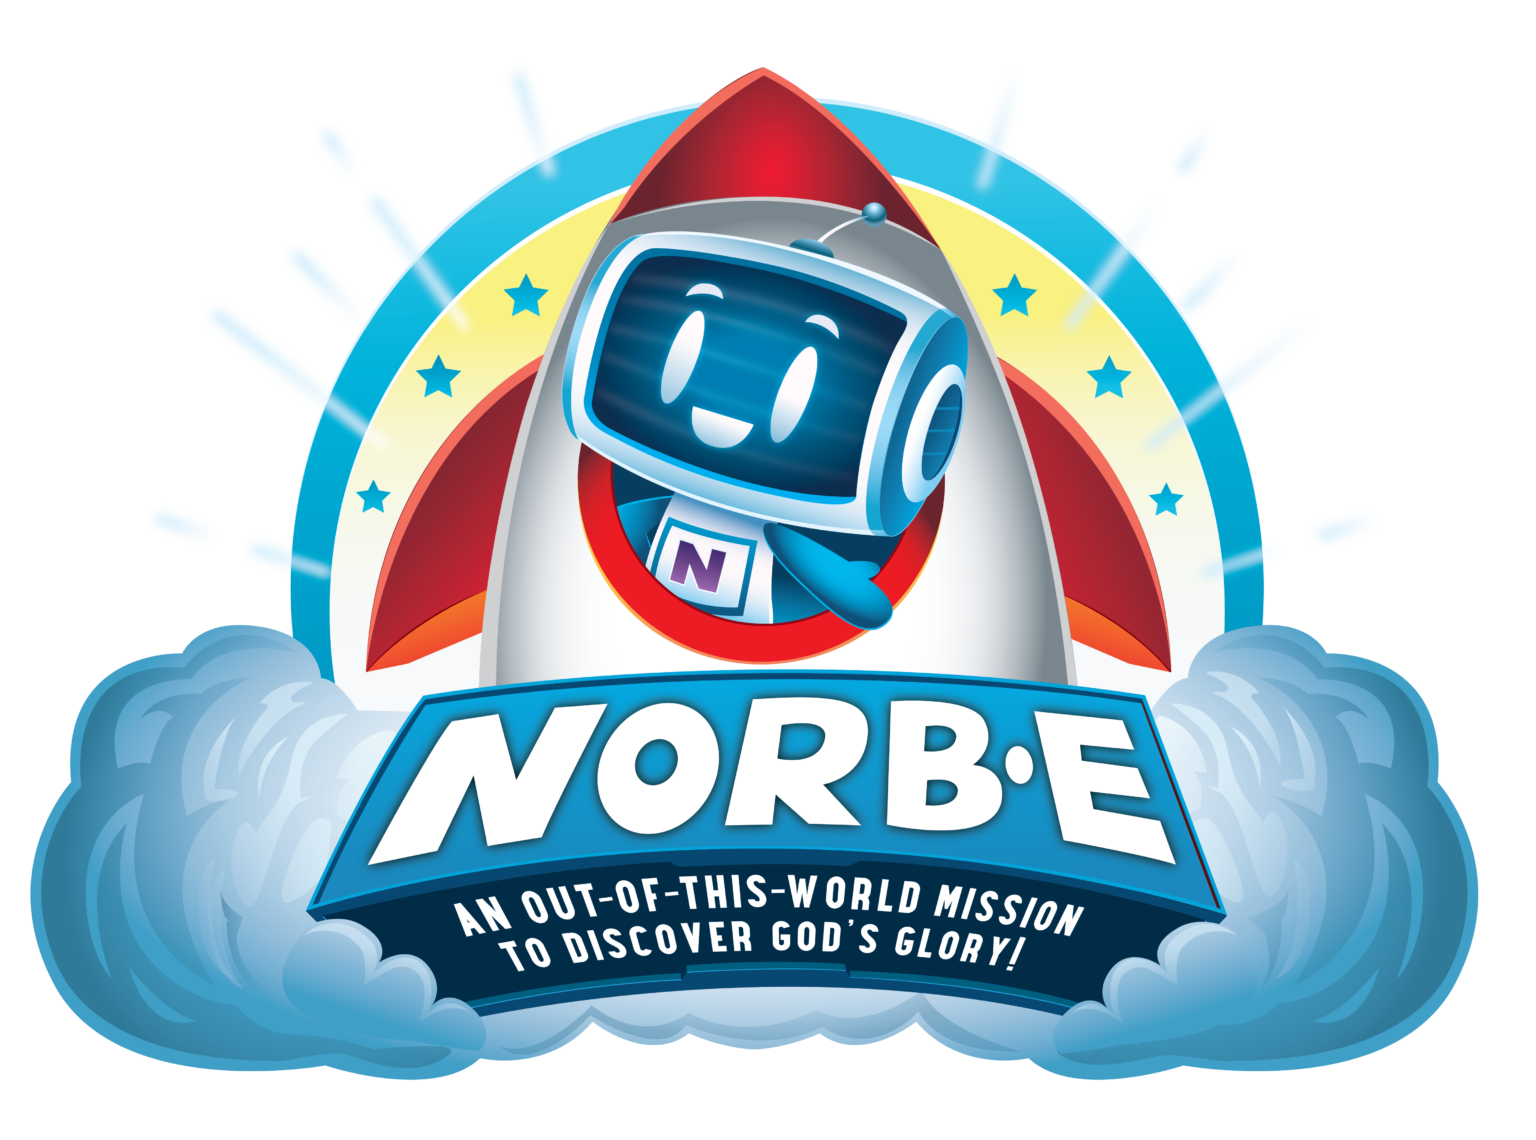 NORB-E. An out of this world mission to discover God's glory. This summer, blast off into an unforgettable VBS space adventure. Together, kids will learn about the love of God through his son, Jesus.